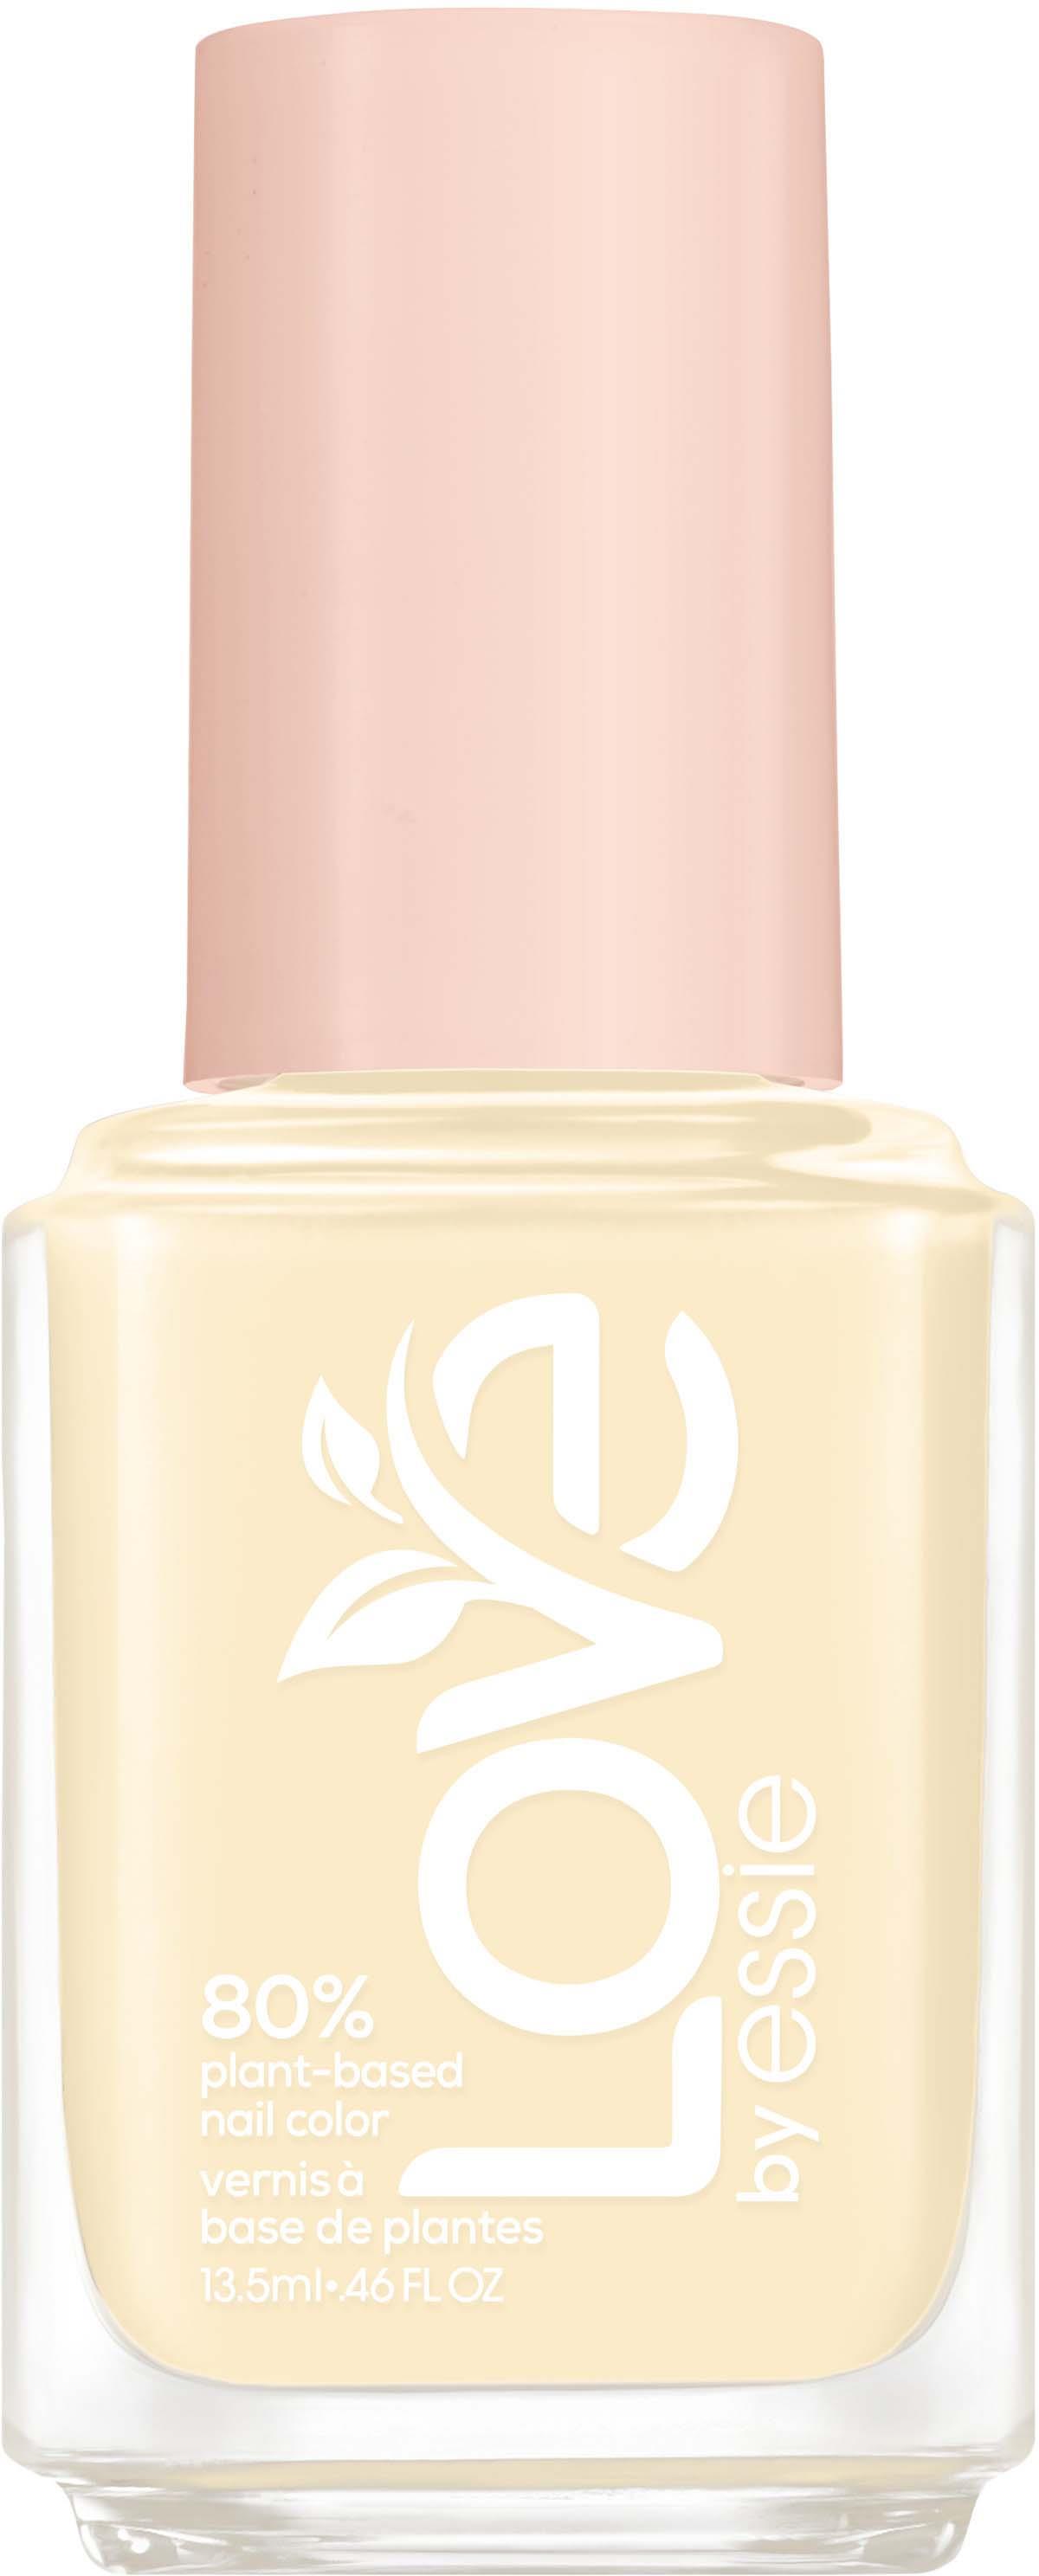 Essie LOVE by Essie 80% 230 Plant-based Side Color The On Brighter Nail